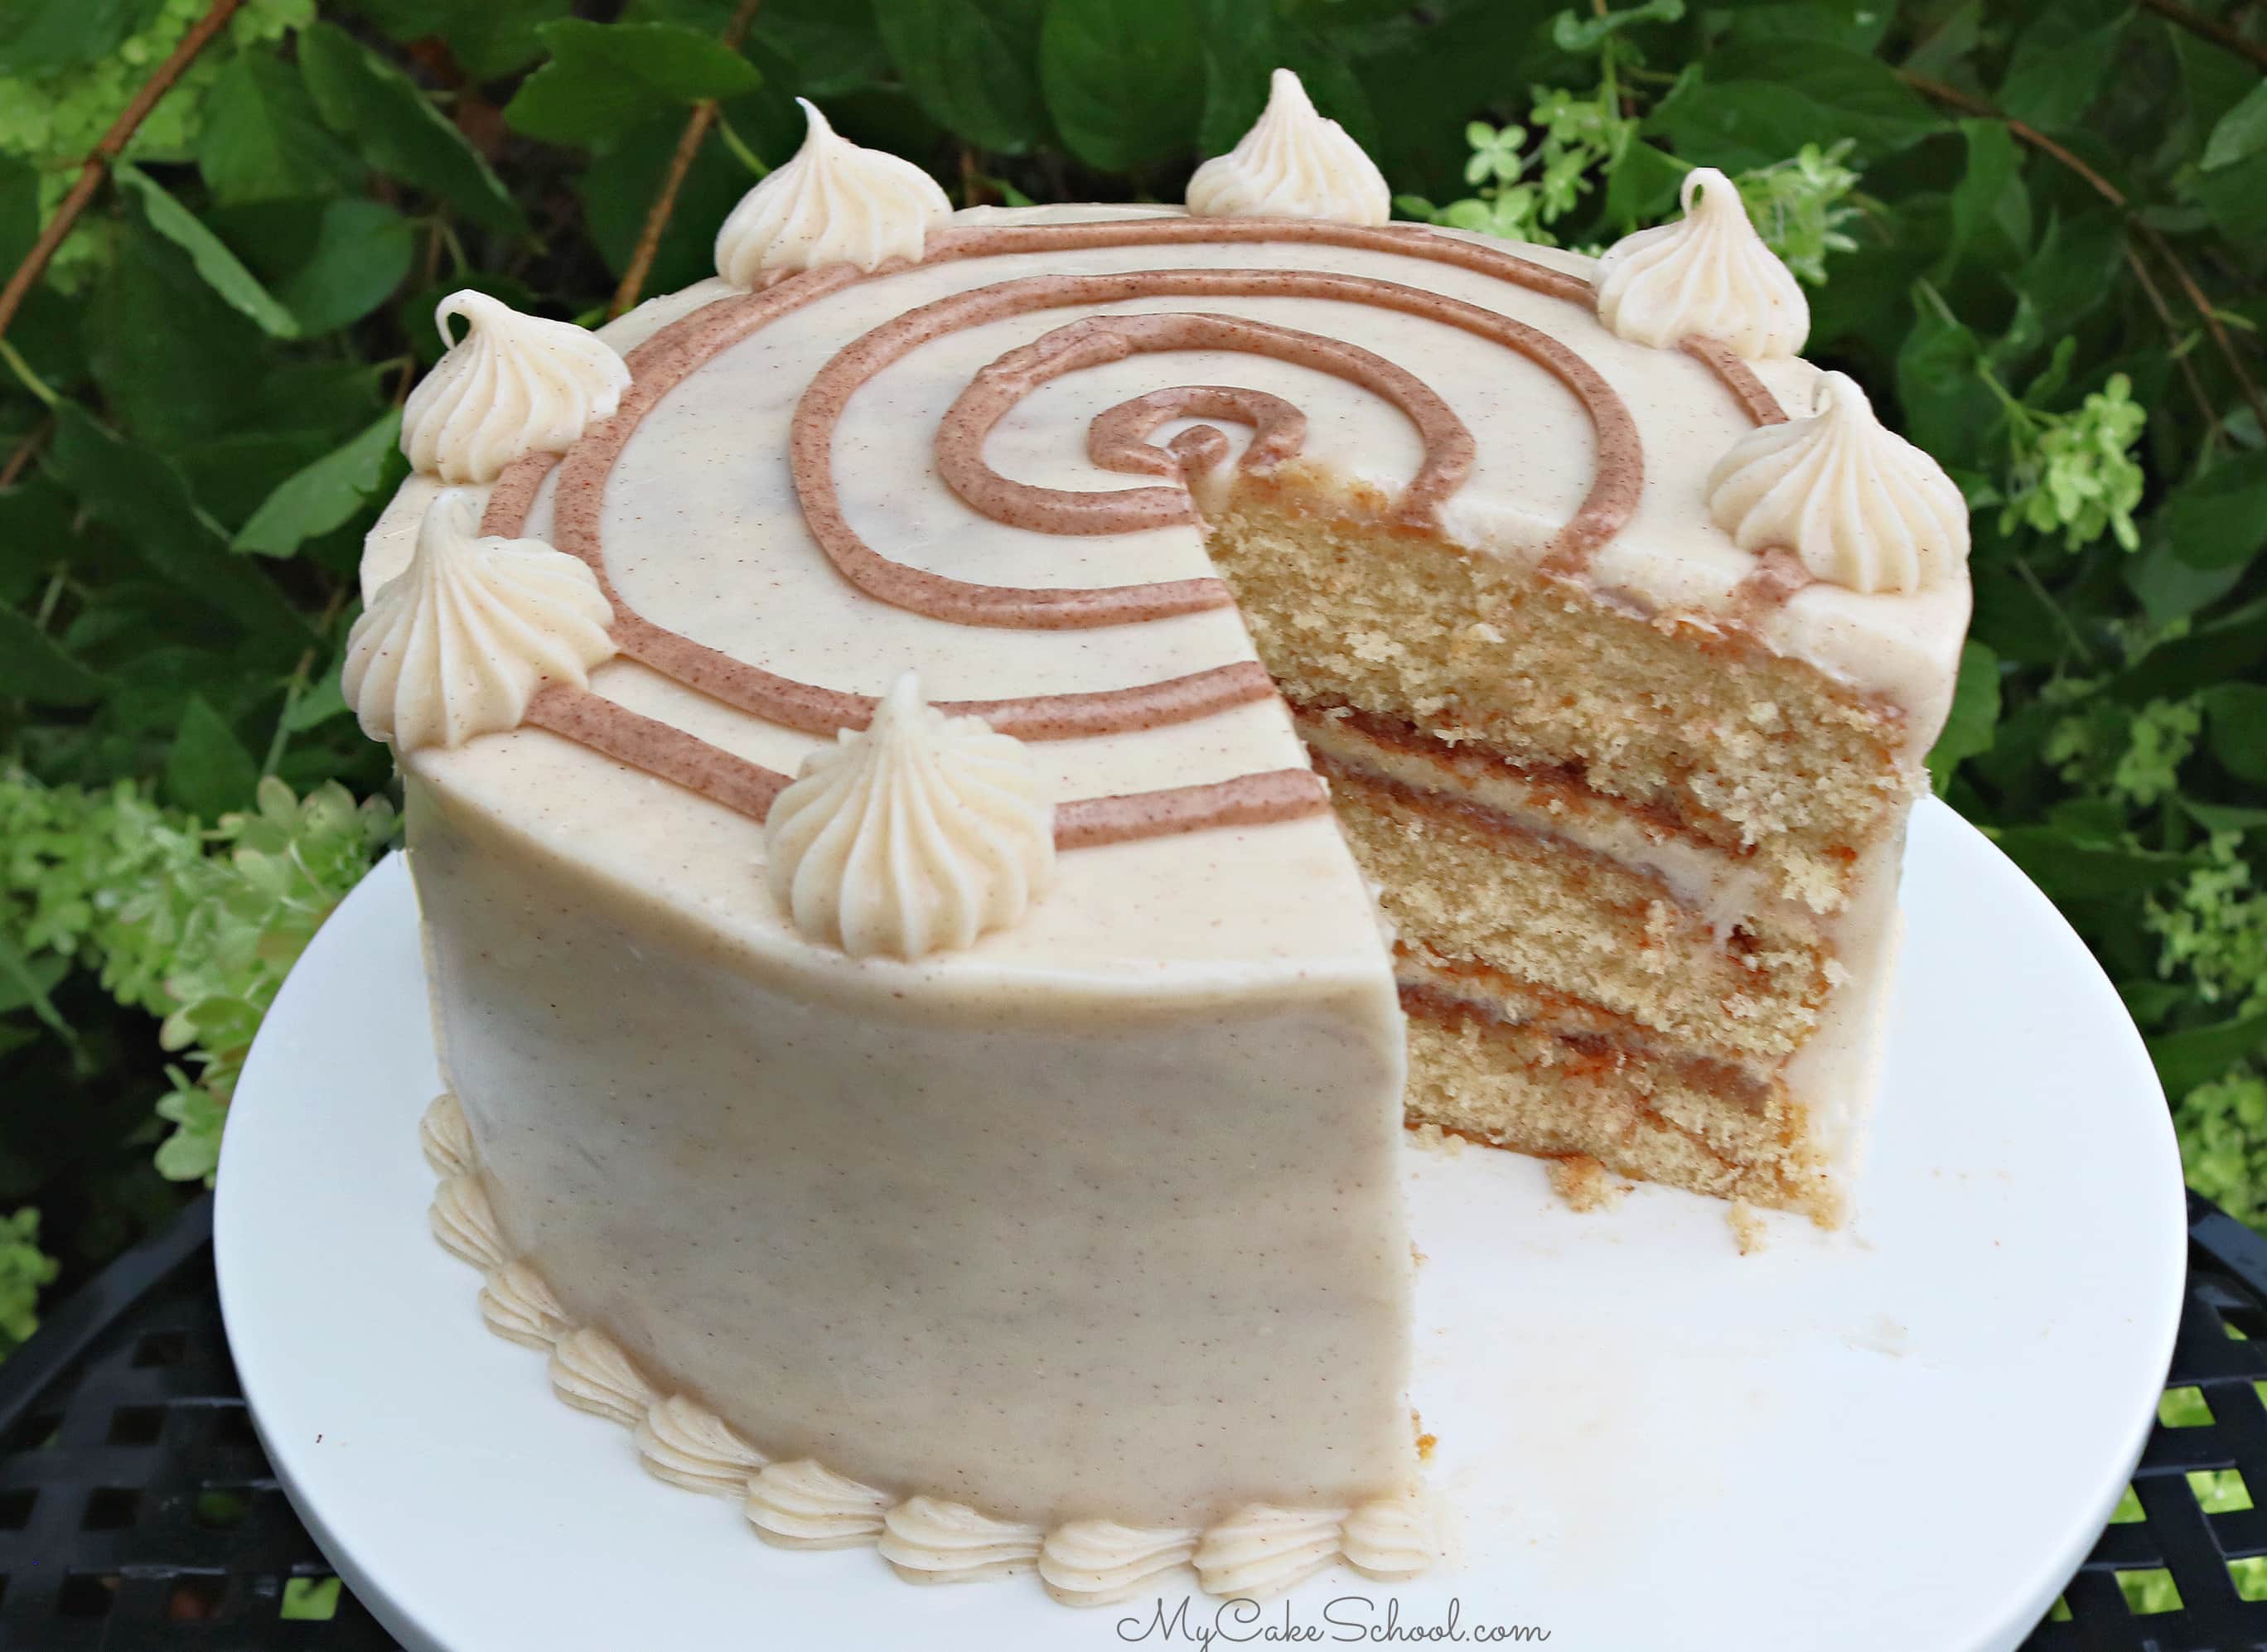 This homemade Cinnamon Roll Cake is super moist and has so much flavor!